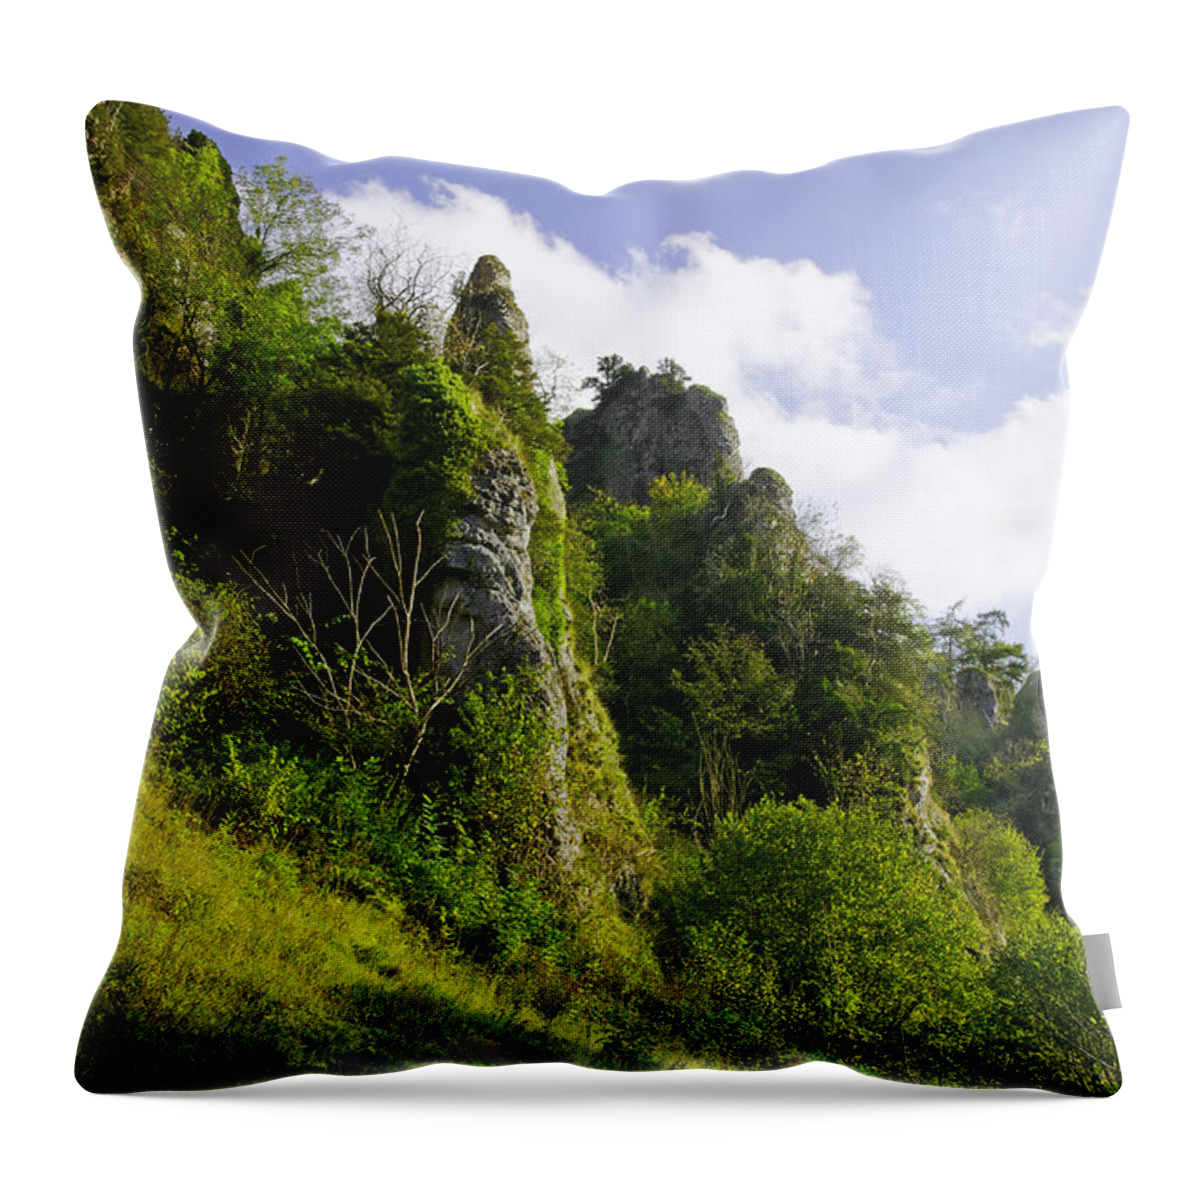 Dovedale Throw Pillow featuring the photograph Tissington Spires by Rod Johnson